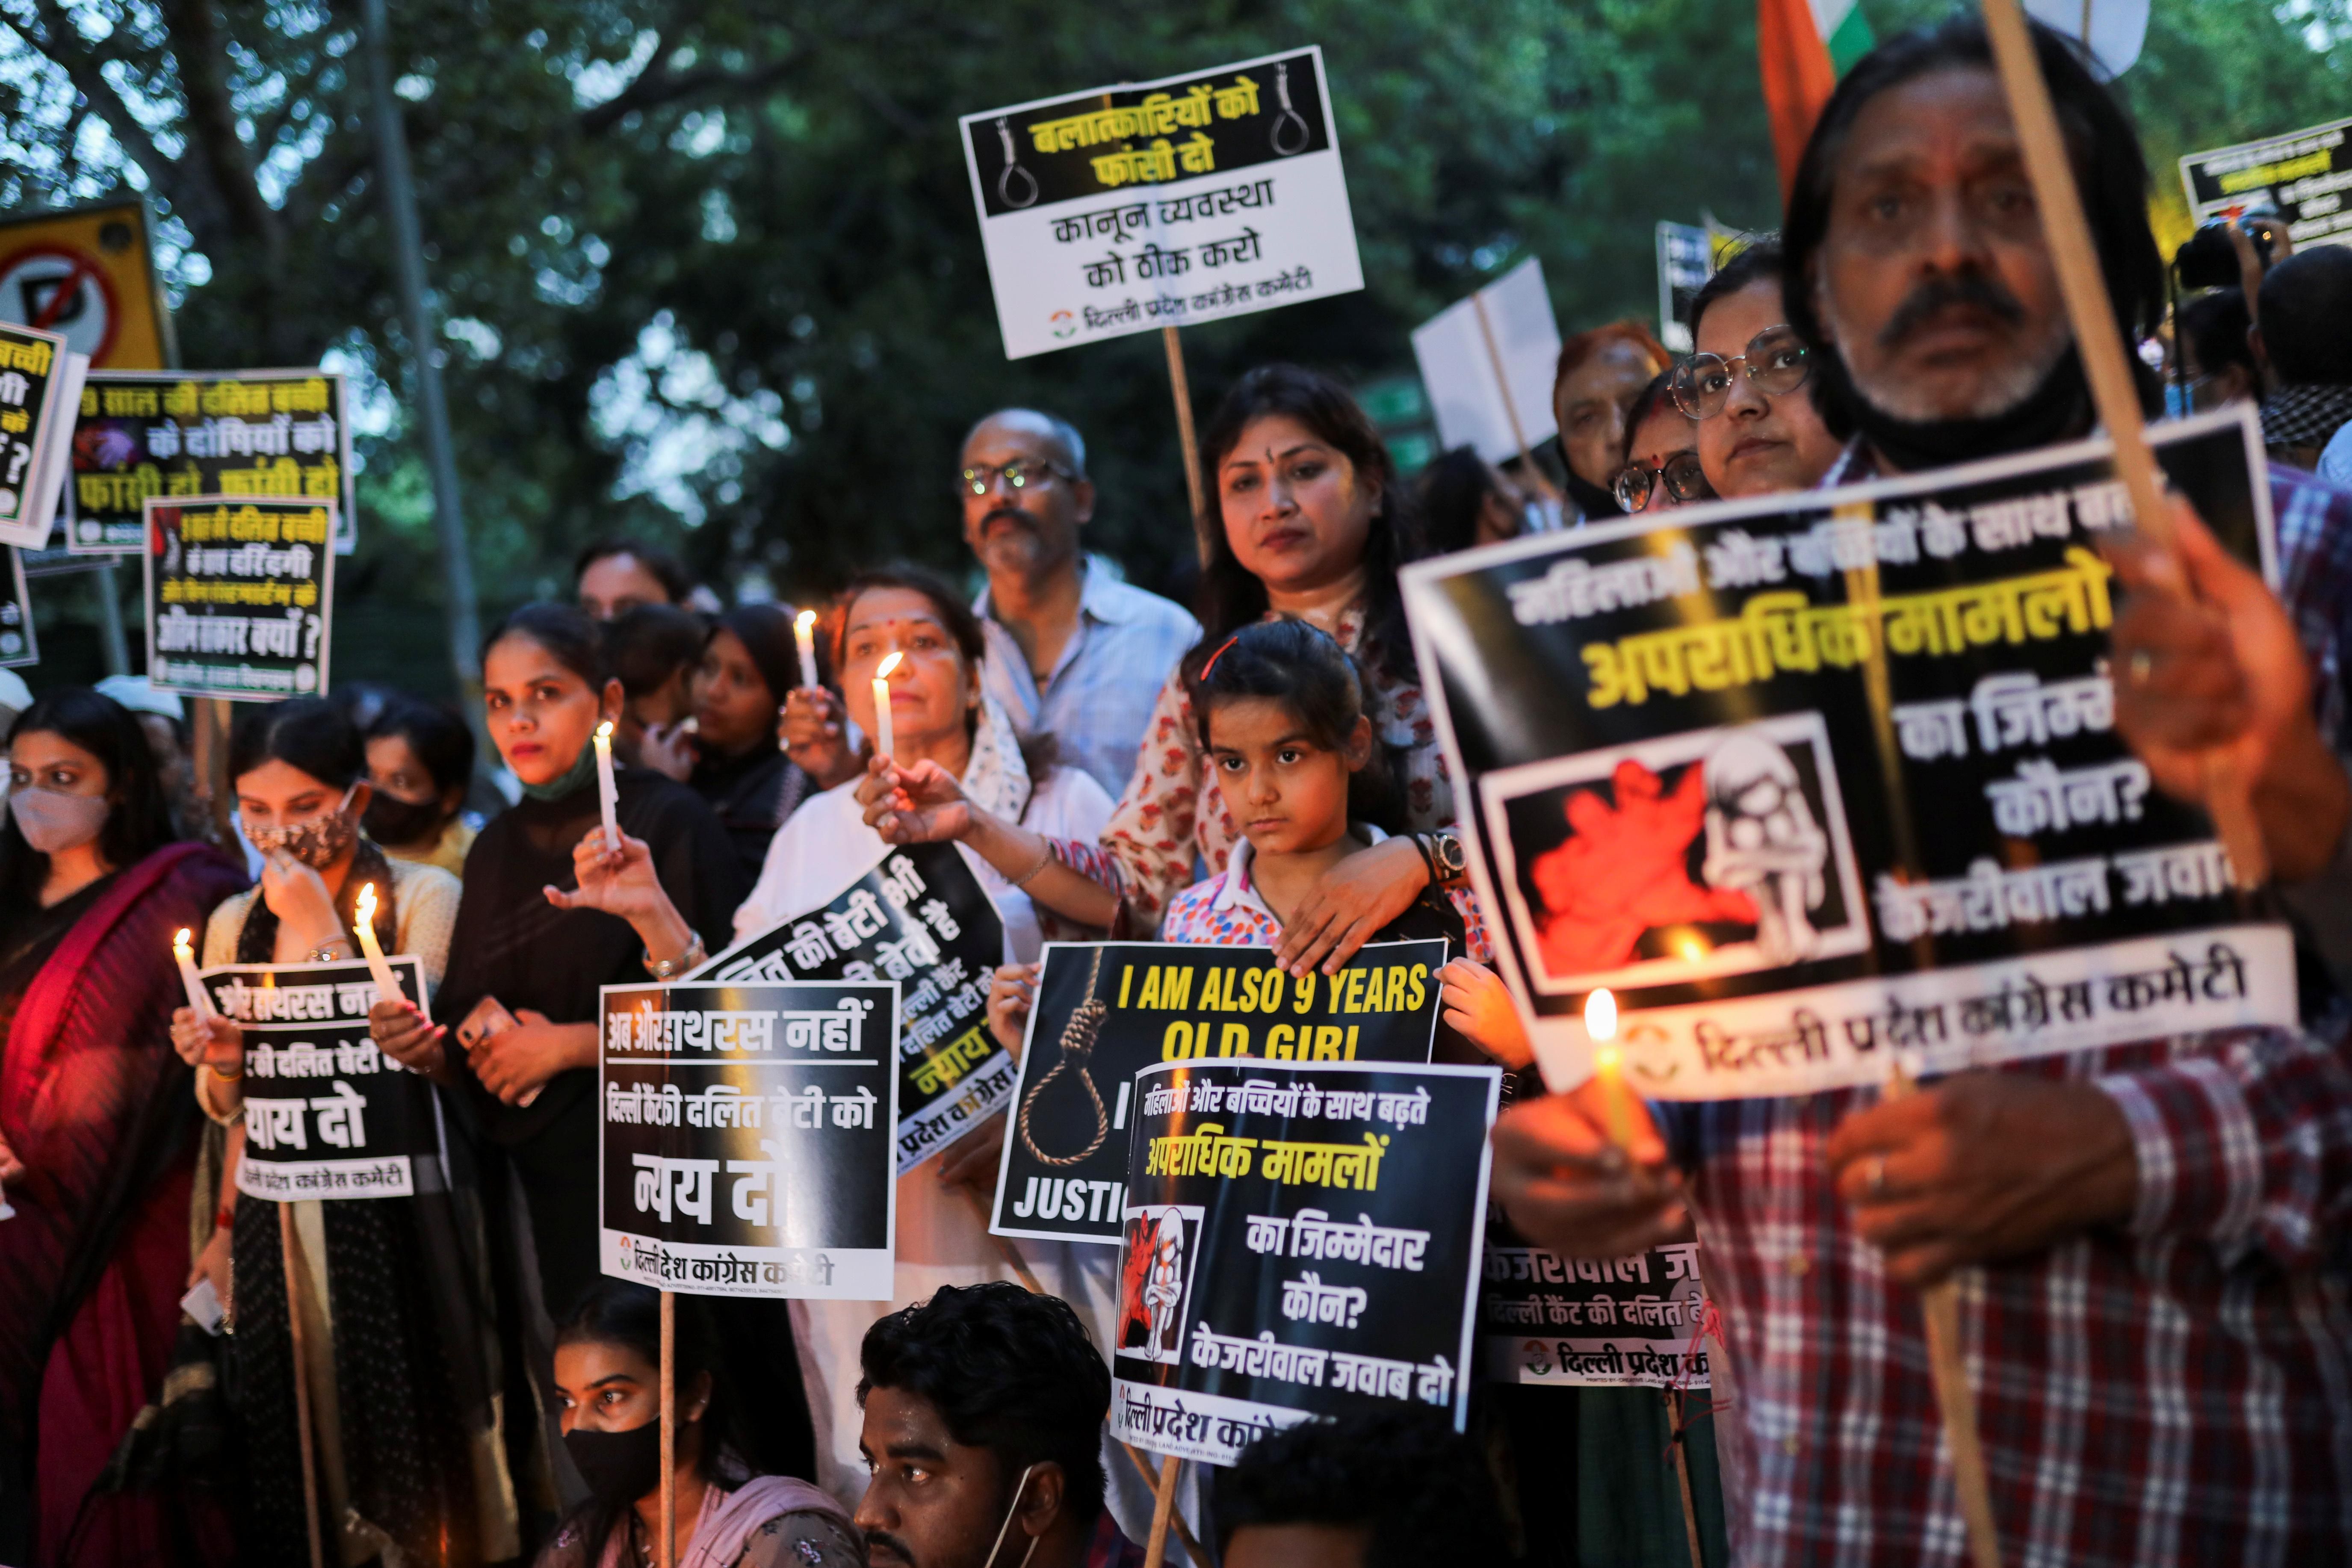 Supporters of India's main opposition Congress party attend a candlelight vigil to protest against the alleged rape and murder of a 9-year-old girl in New Delhi, India, August 4, 2021